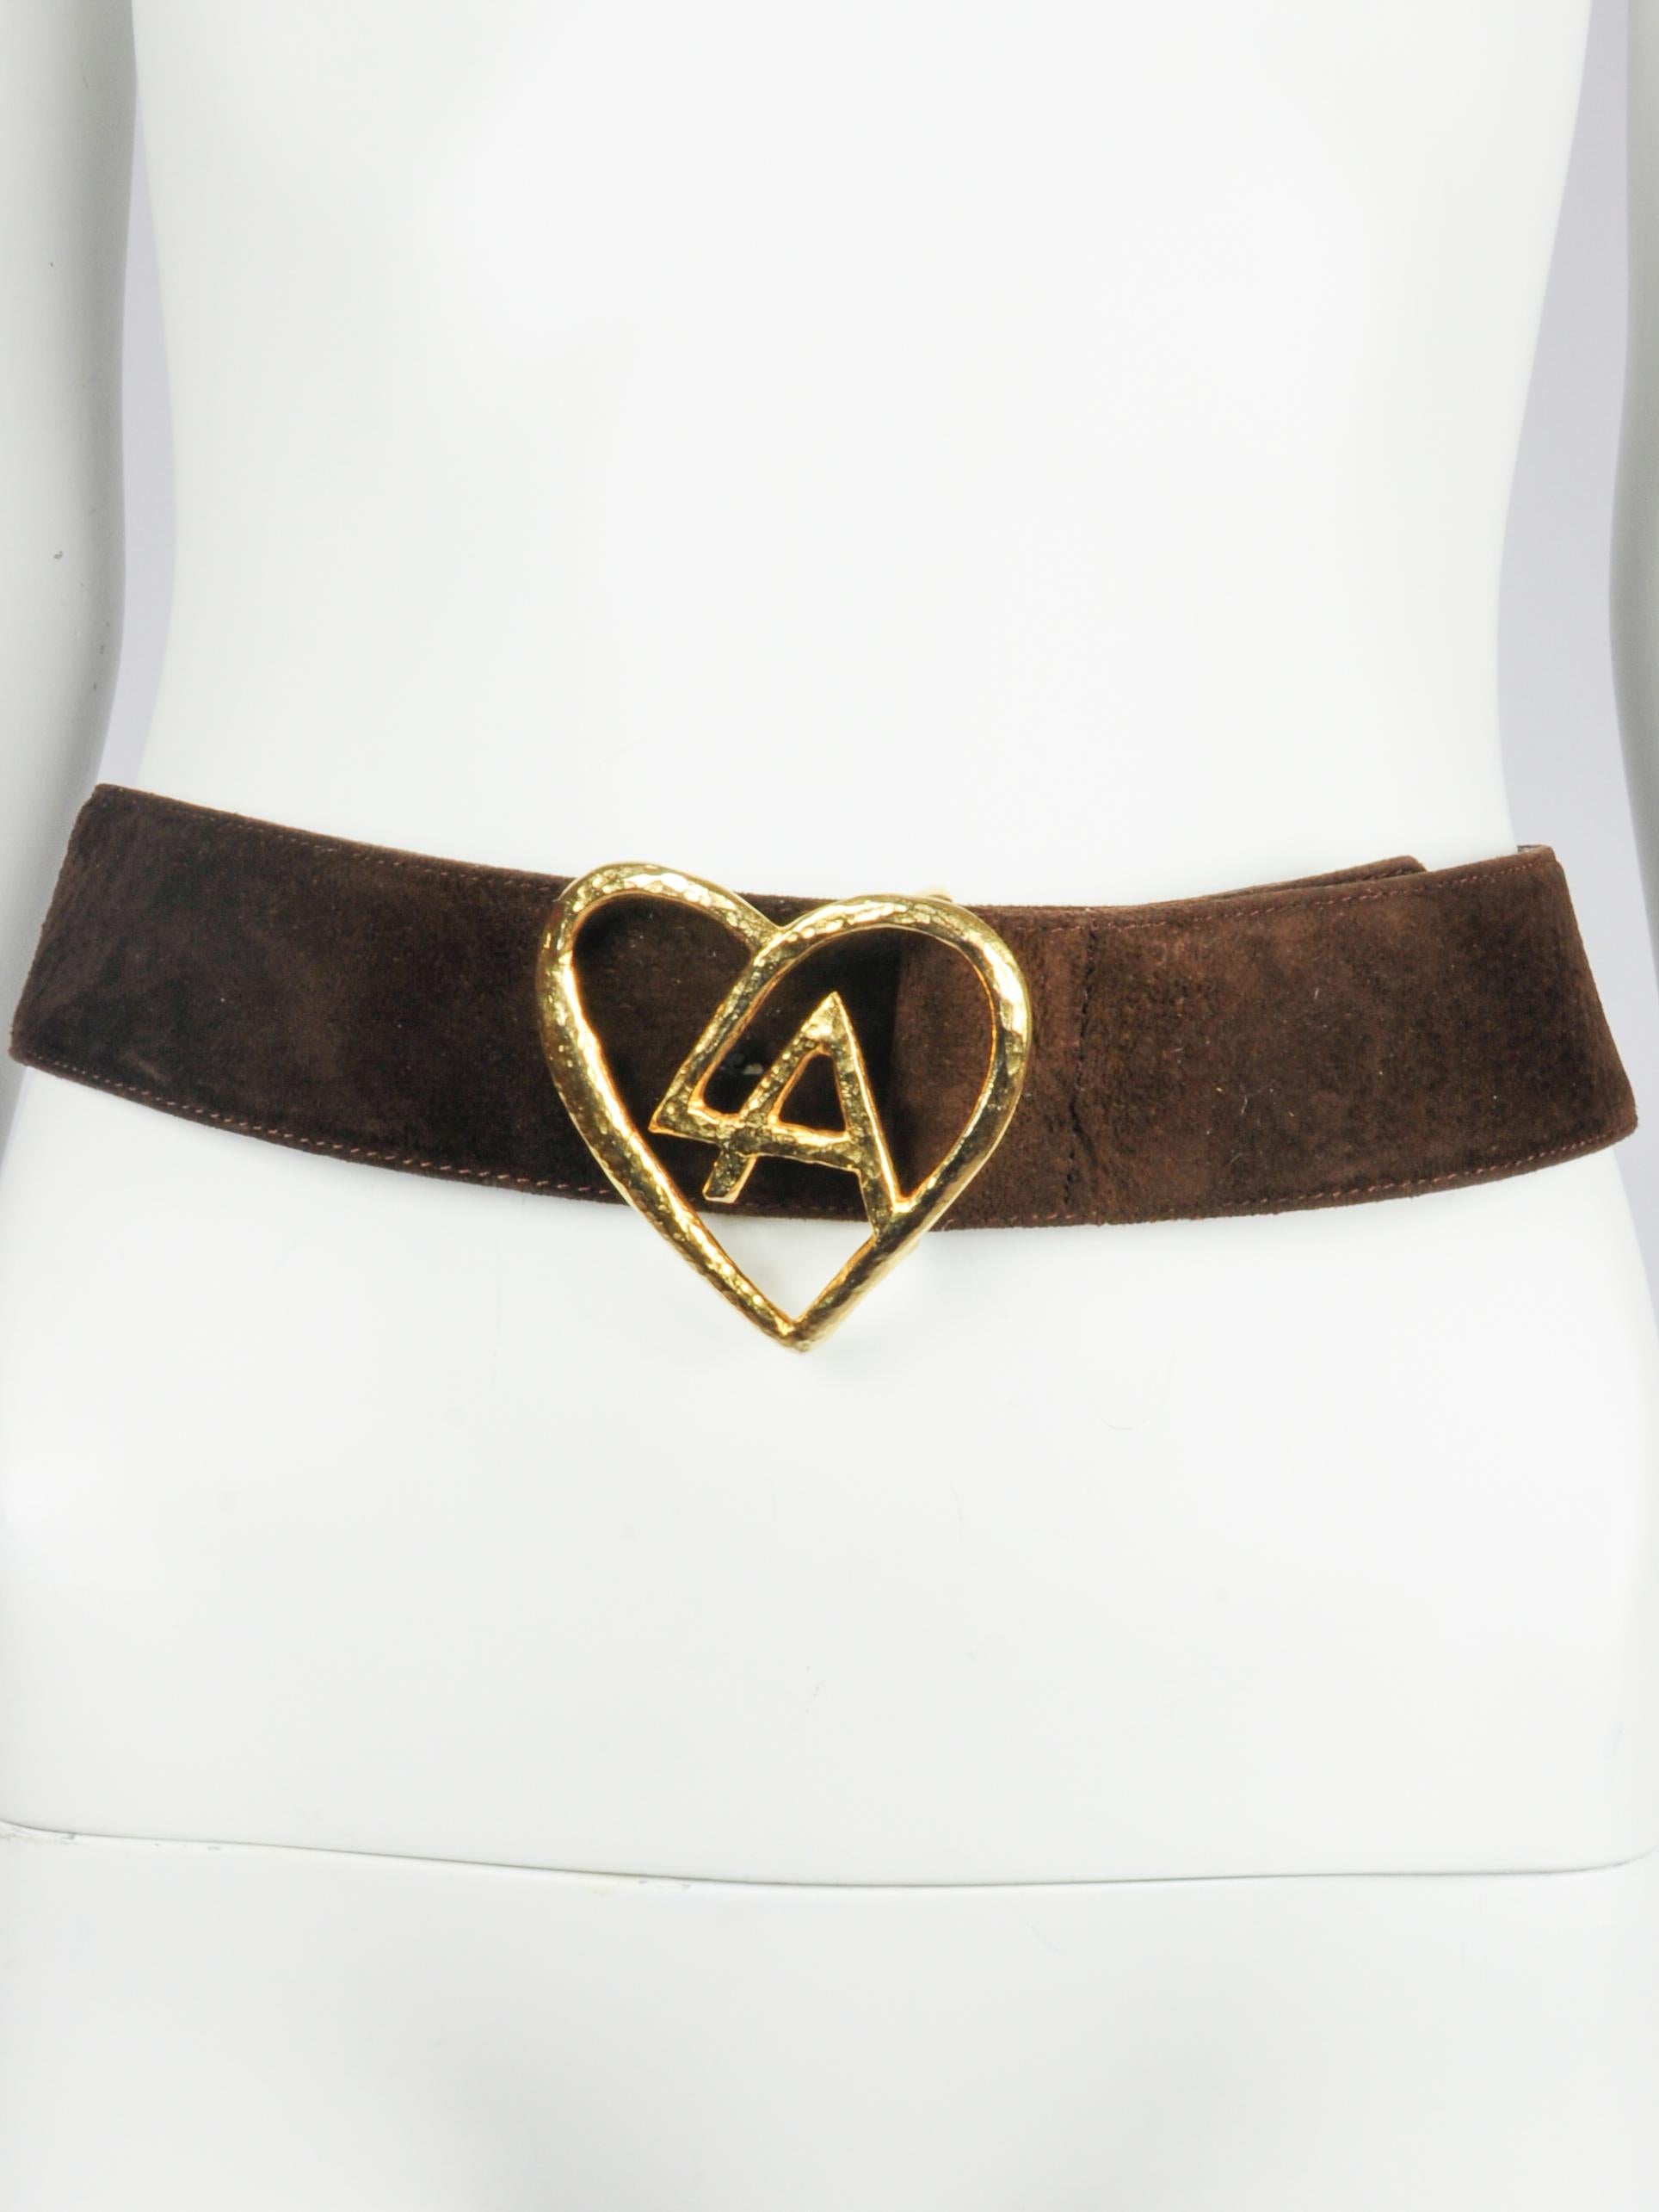 Loris Azzaro Brown Suede Gold LA Heart Logo Waistbelt 1970s In Good Condition For Sale In AMSTERDAM, NL